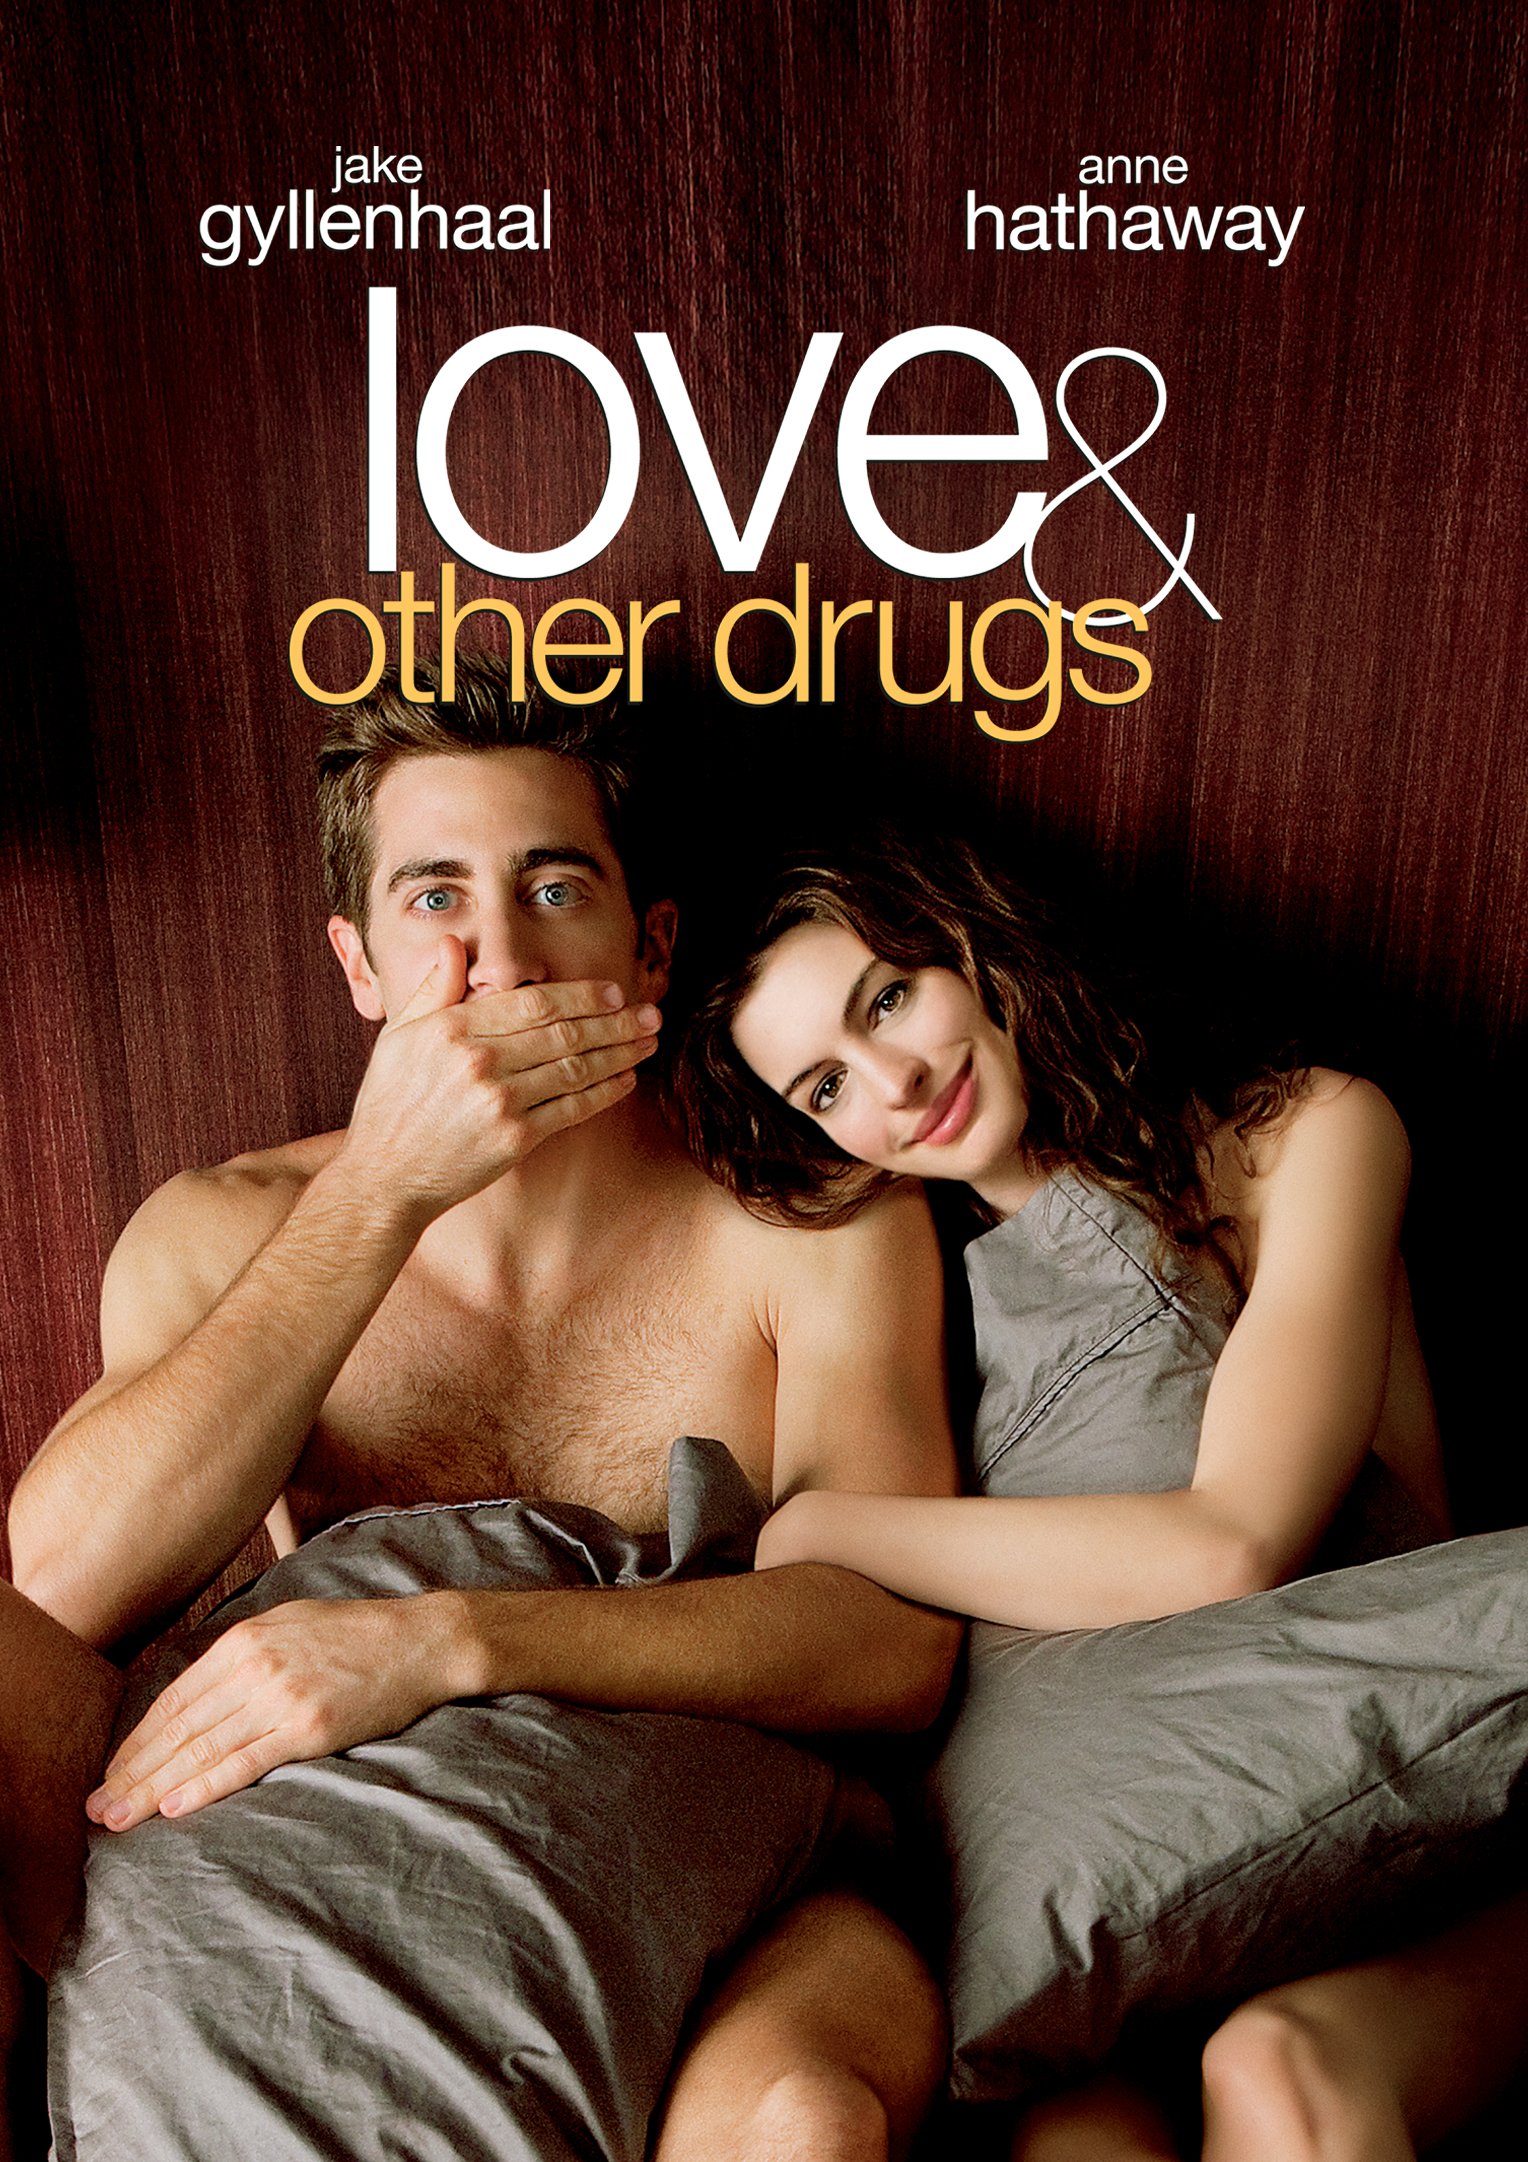 Love & Other Drugs (2010) Main Poster.